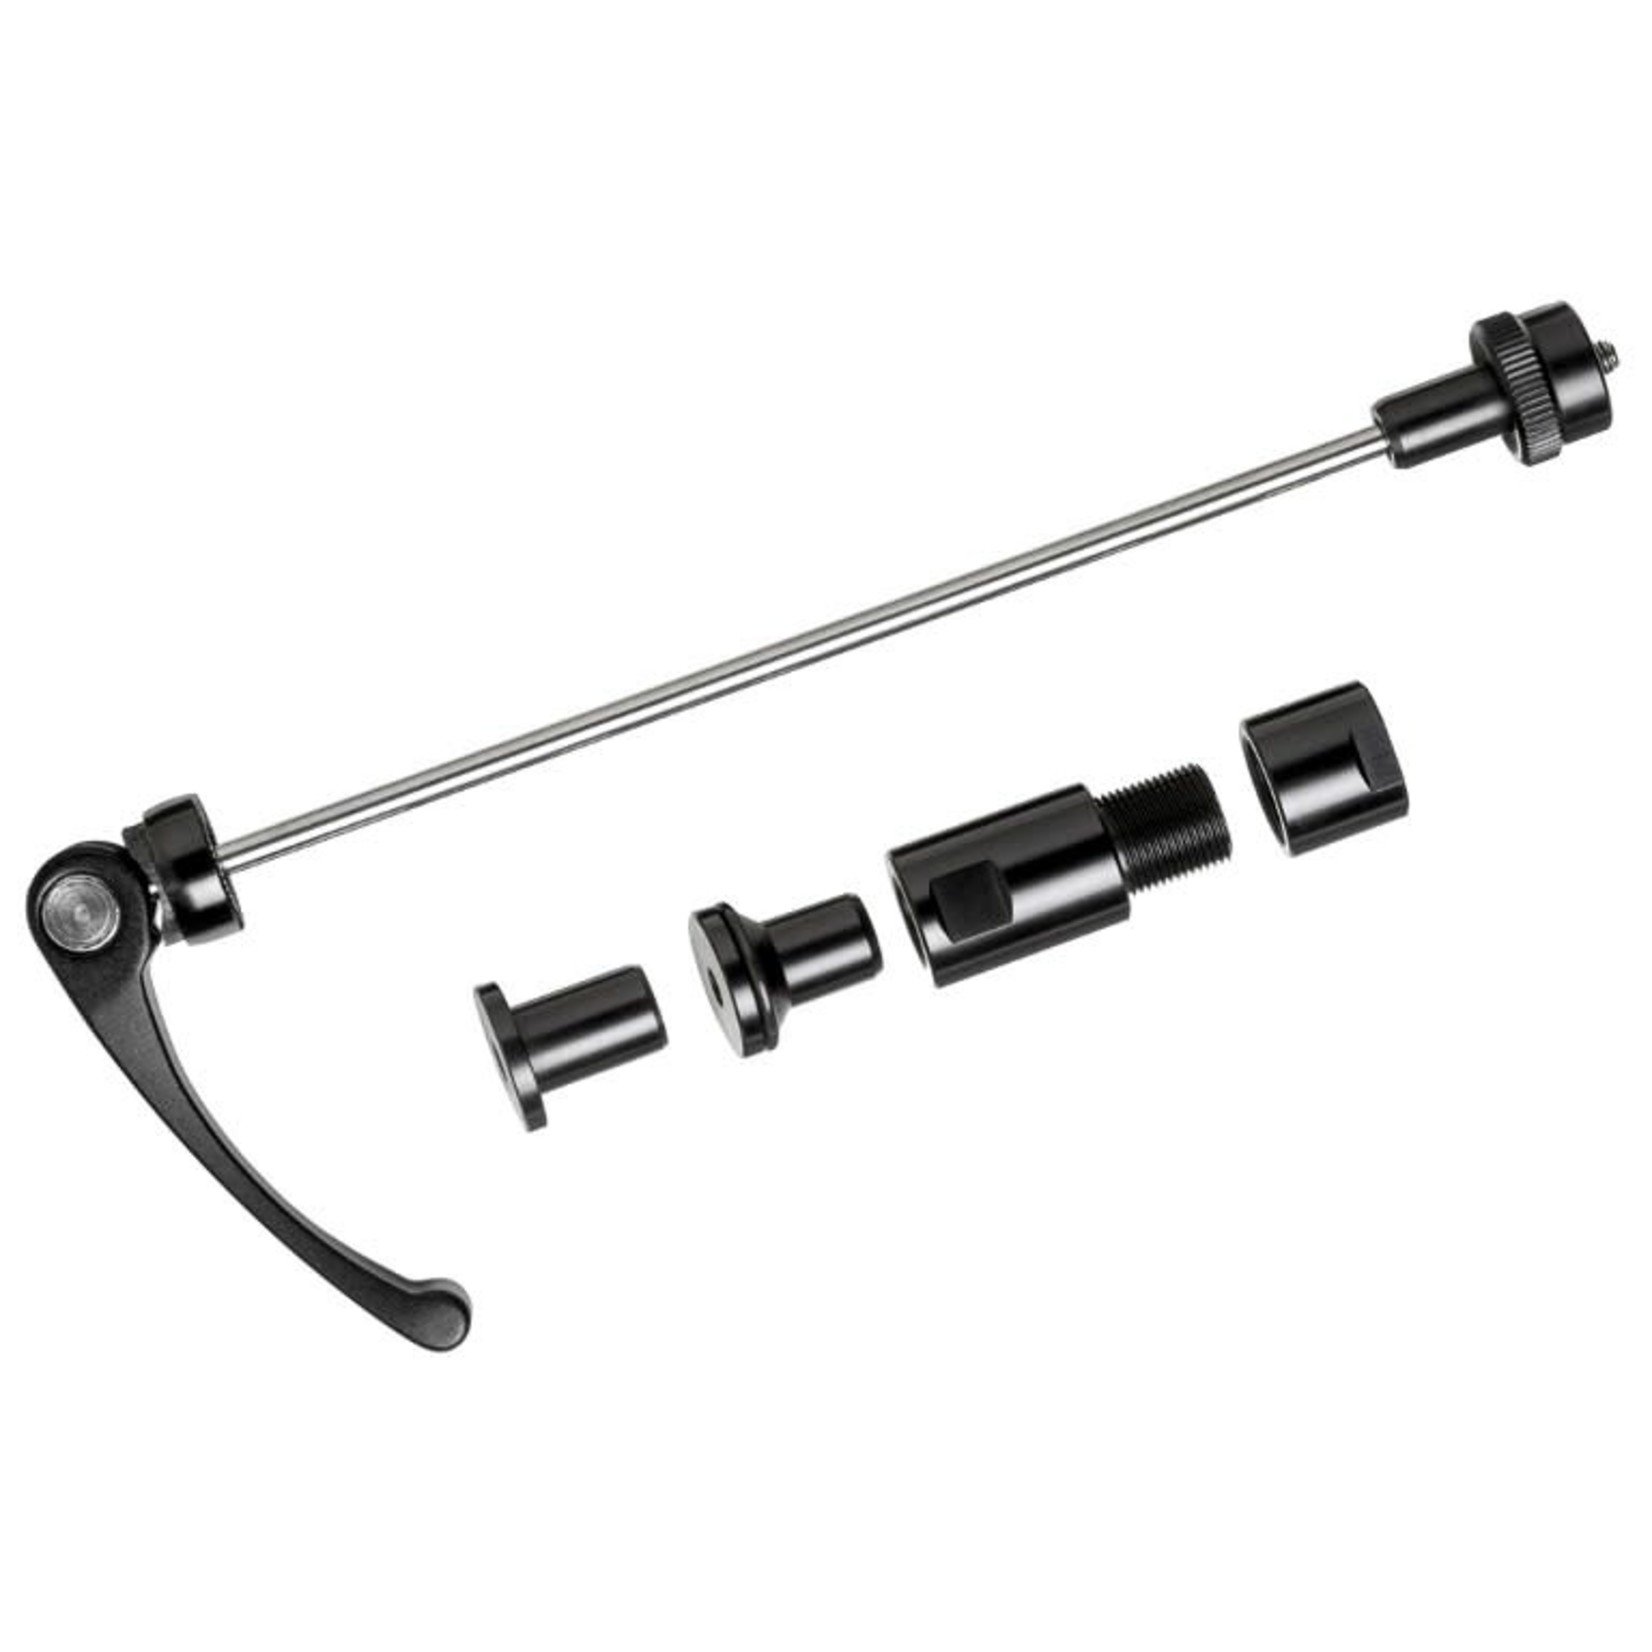 Tacx, T2835, Direct Drive quick release and adapter for Thru-Axle bikes, 142x12mm and 148x12mm